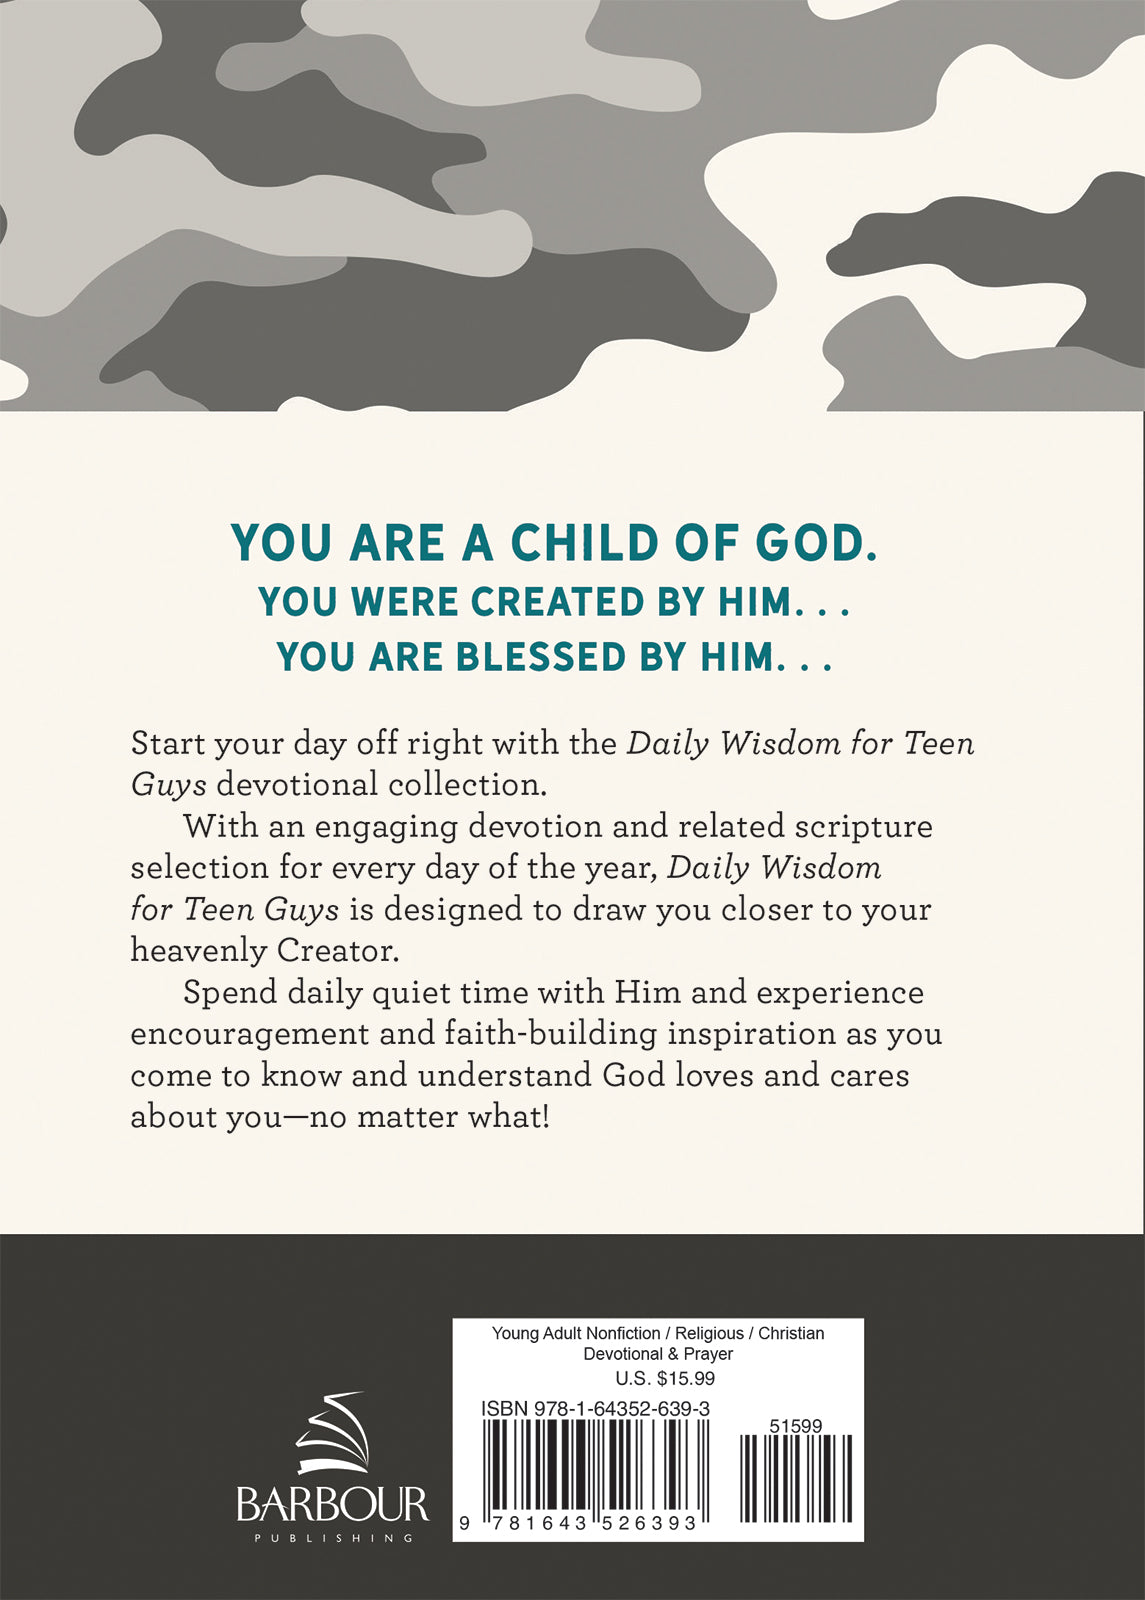 Daily Wisdom for Teen Guys - The Christian Gift Company